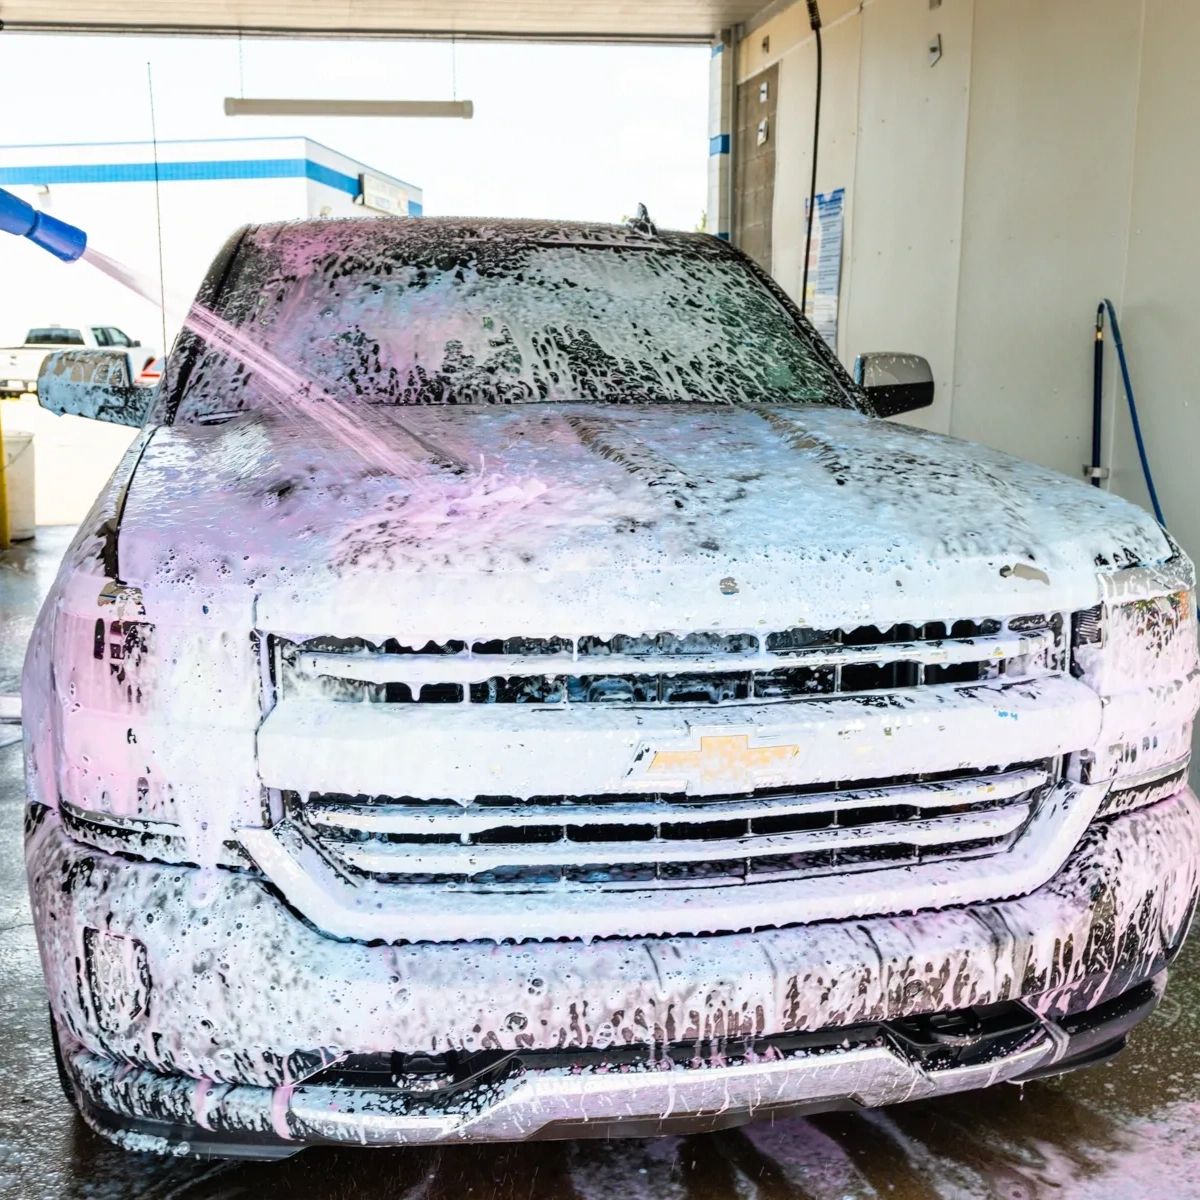 Say goodbye to the remnants of last week's road trip and hello to a fresh car. Our team will go above and beyond to banish dirt and grime and transform your ride into a shining beauty.